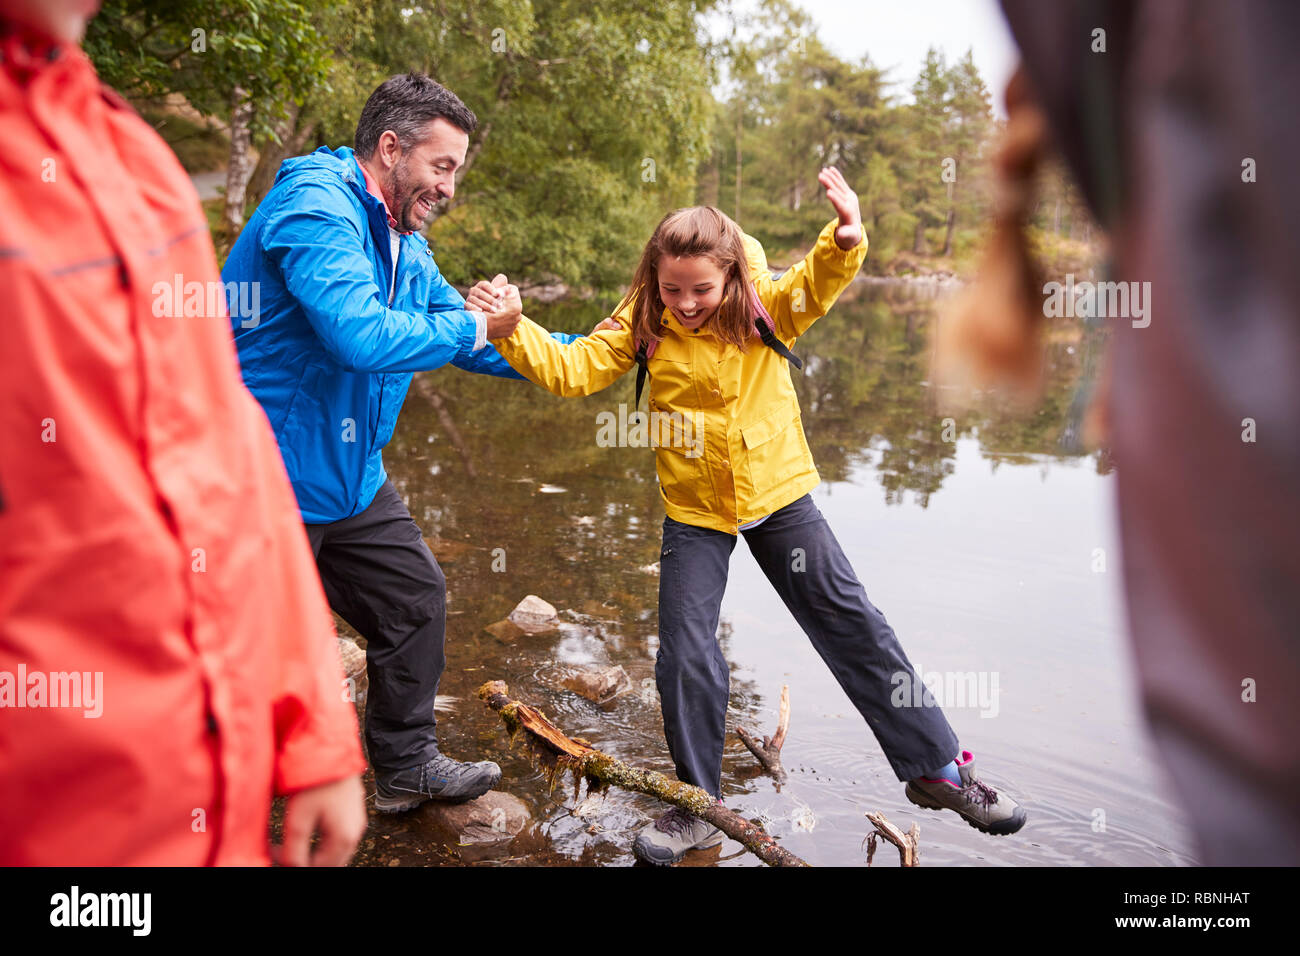 Middle aged father holding his daughter’s hand while she balances on the shore of a lake, Lake District, UK Stock Photo